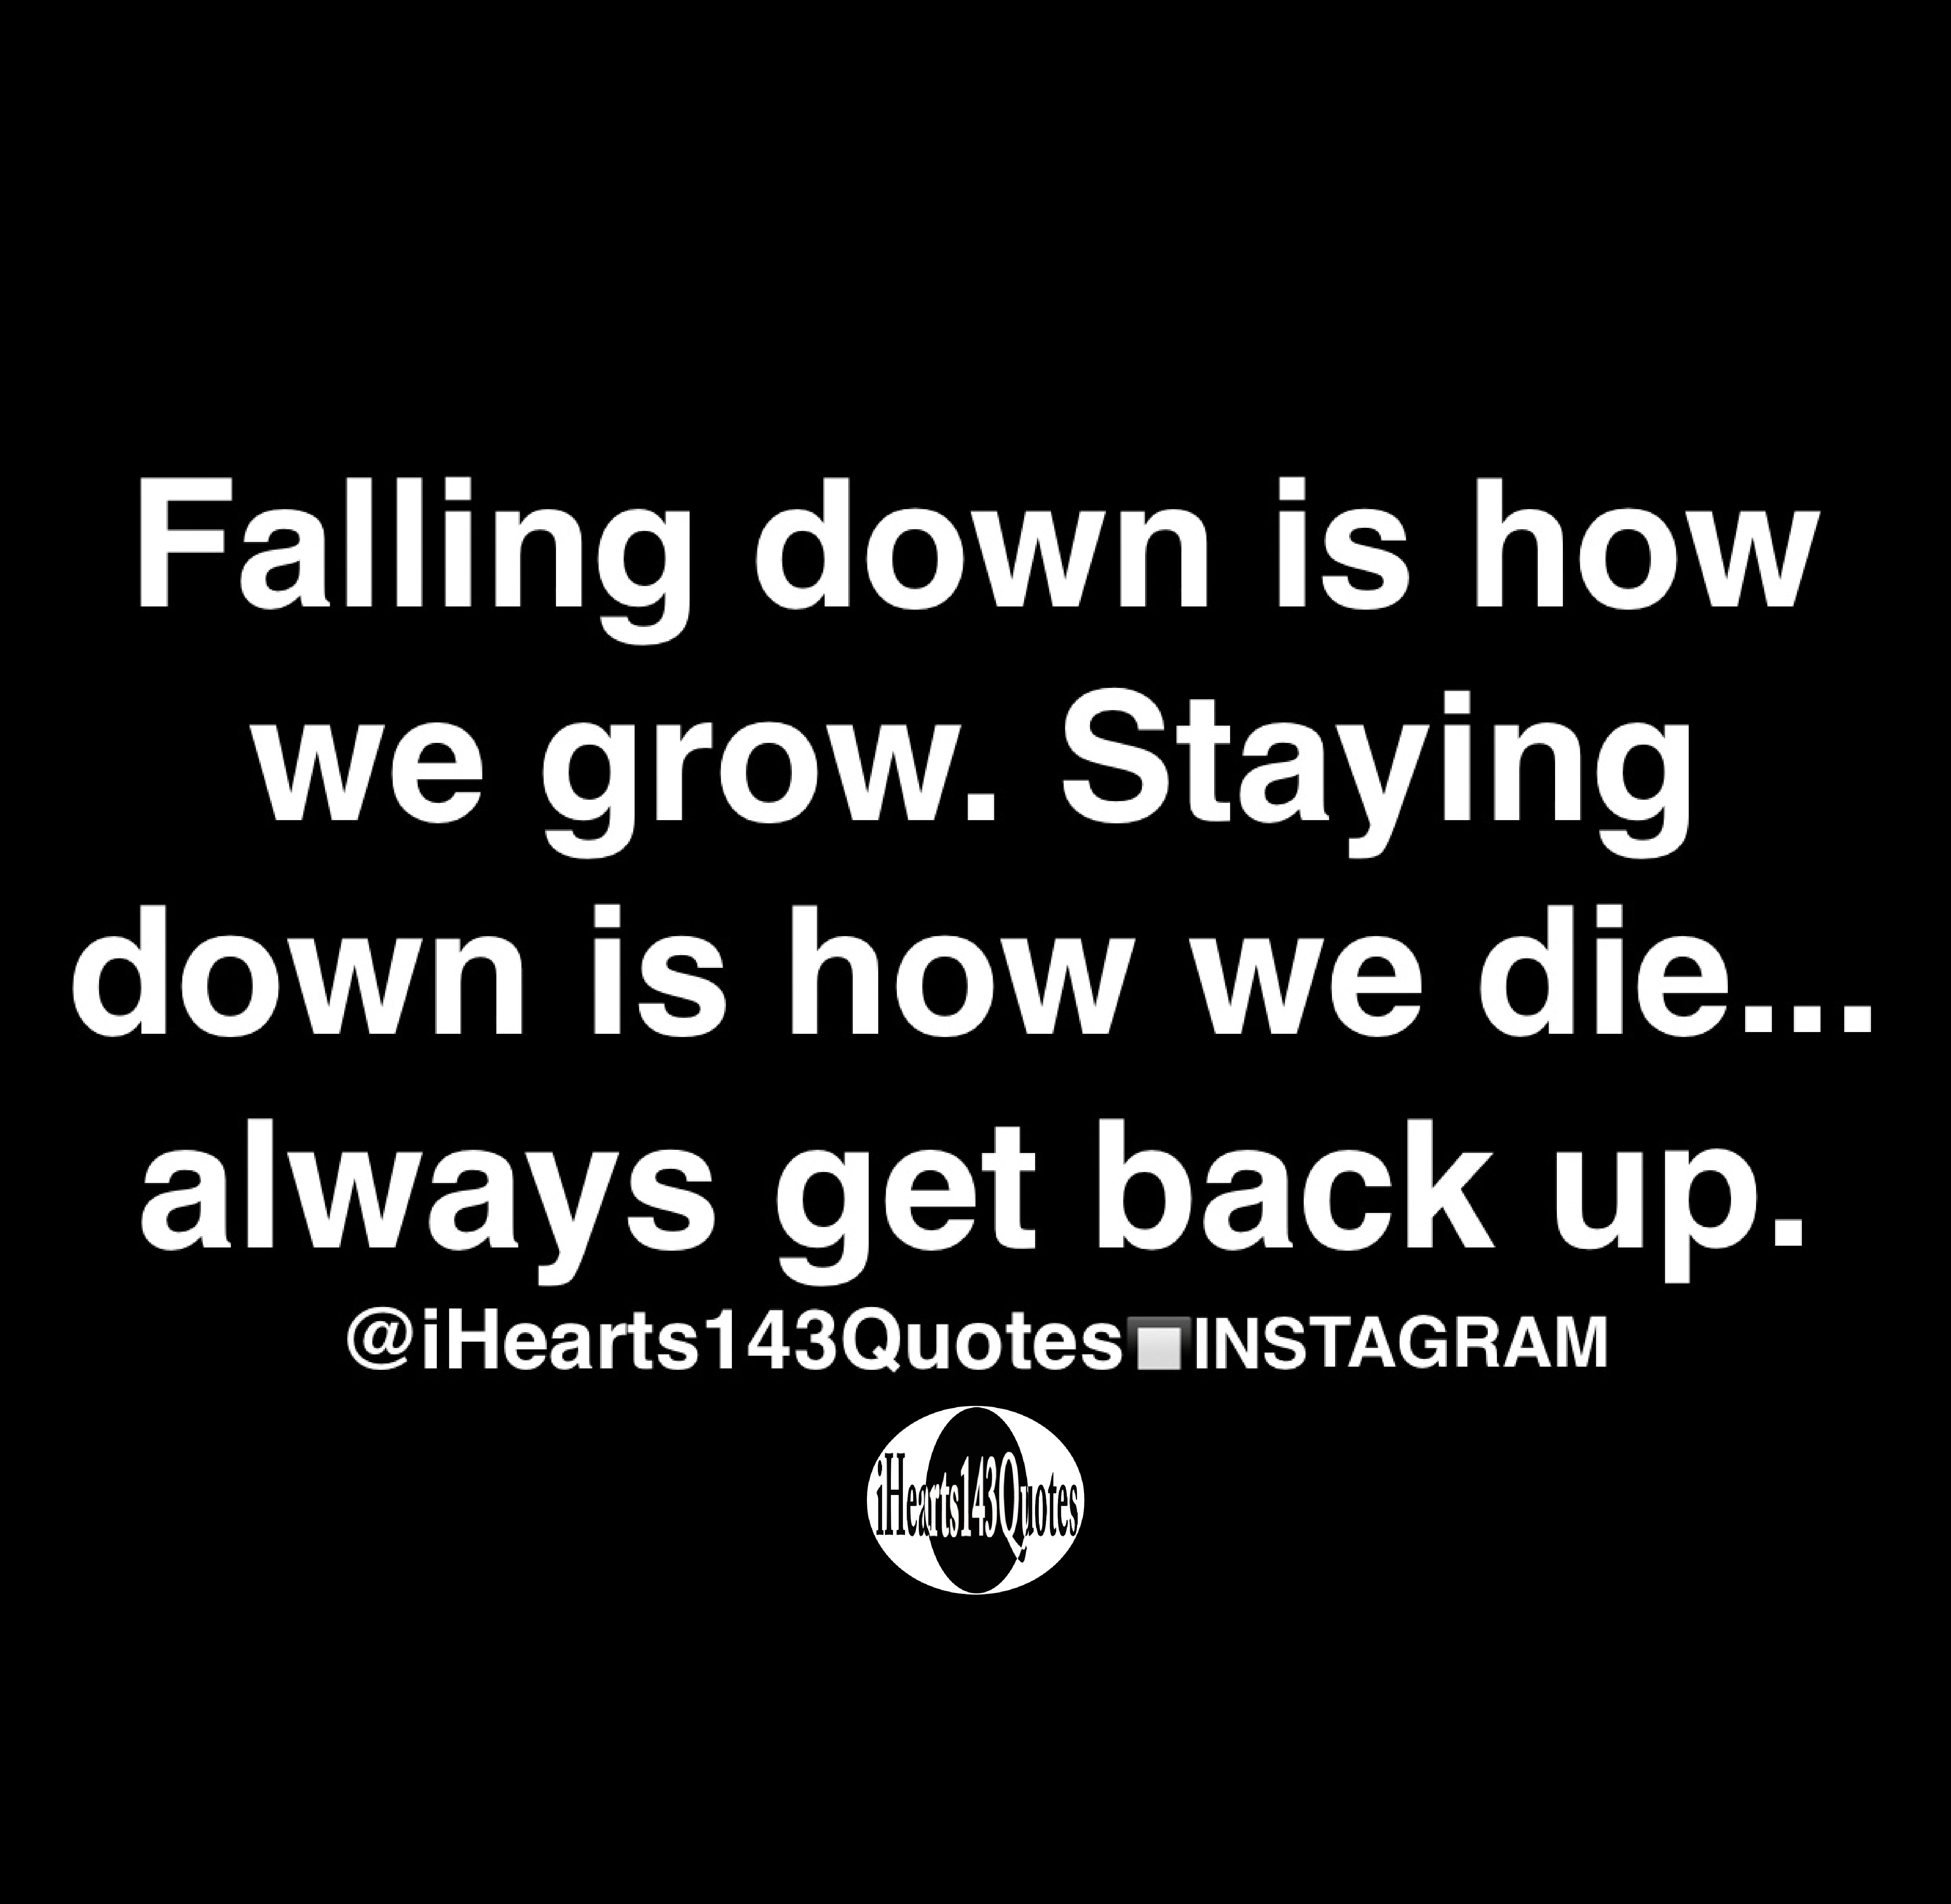 Falling Down Is How We Grow Staying Down Is How We Die Always Get Back Up Quotes Ihearts143quotes